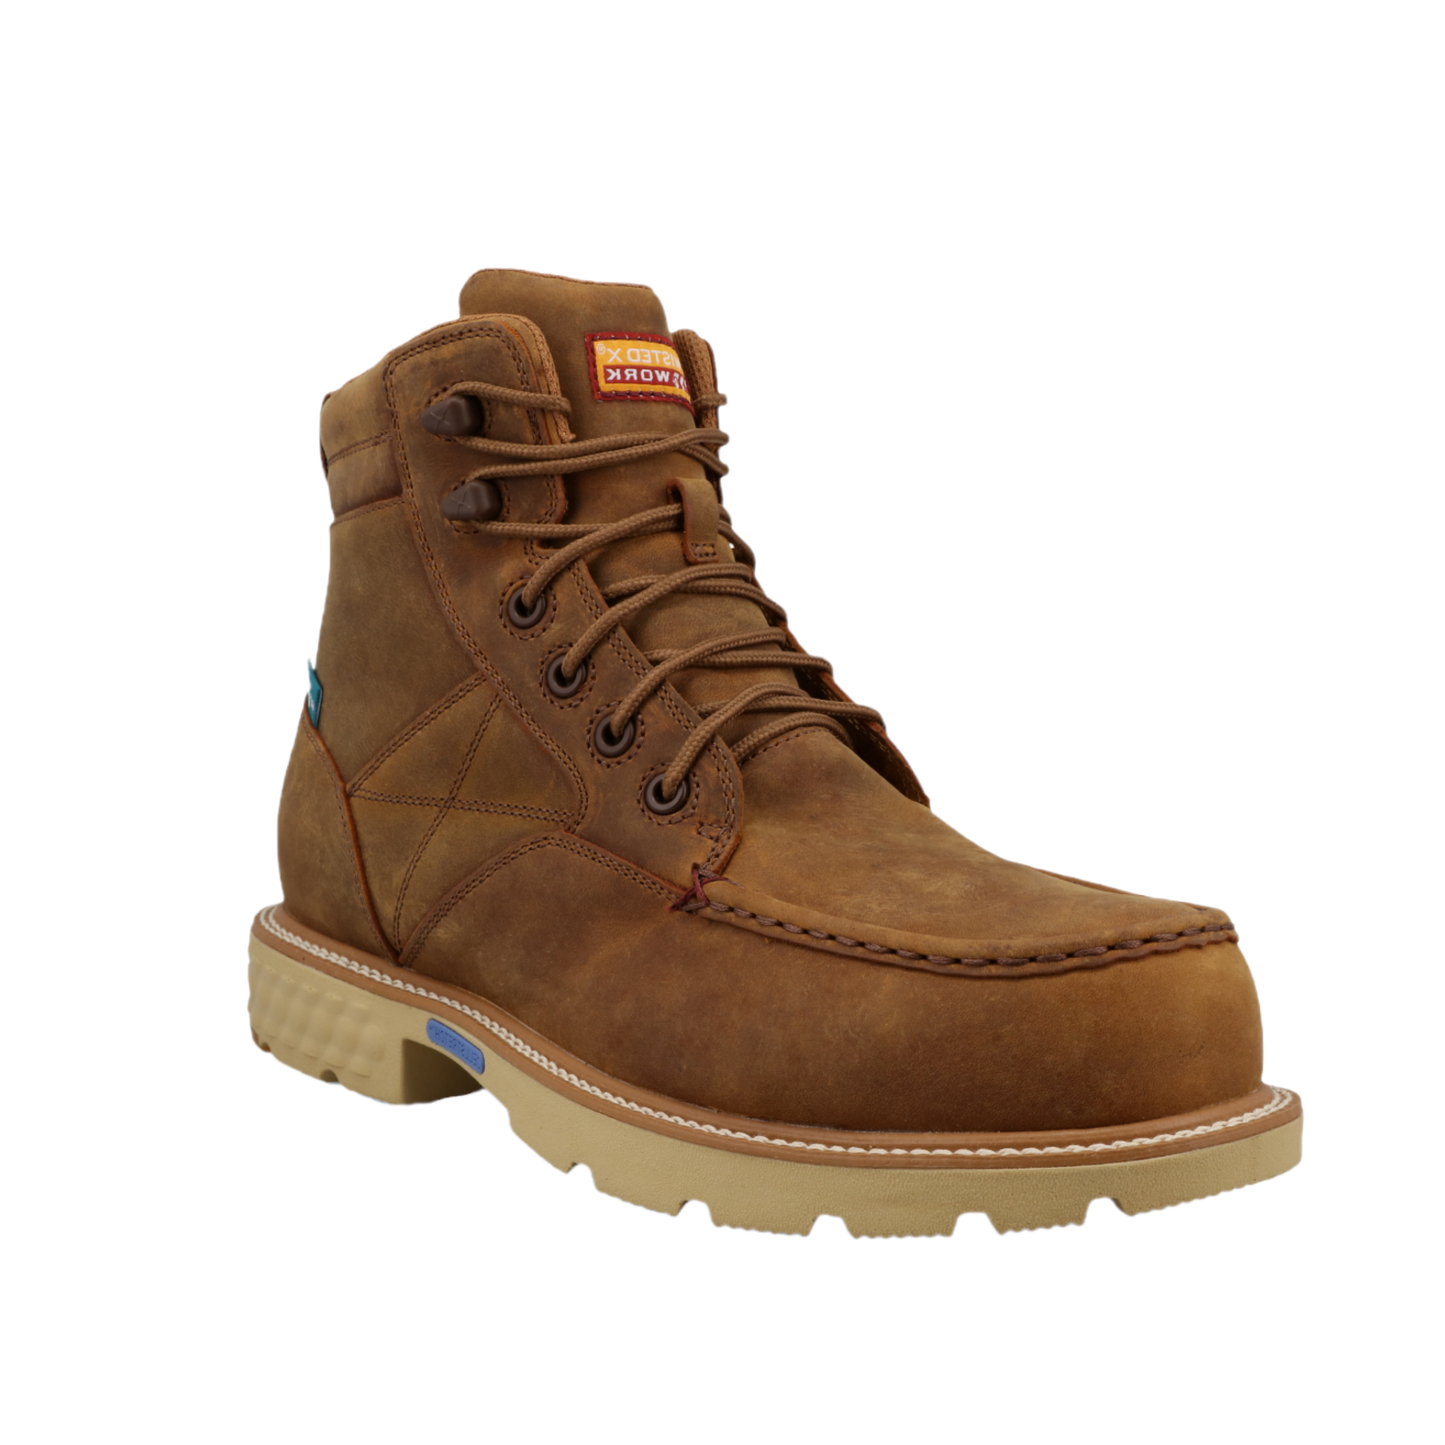 Twisted X® Men's 6 Inch Light Brown Lace Up Boots MXCNW08